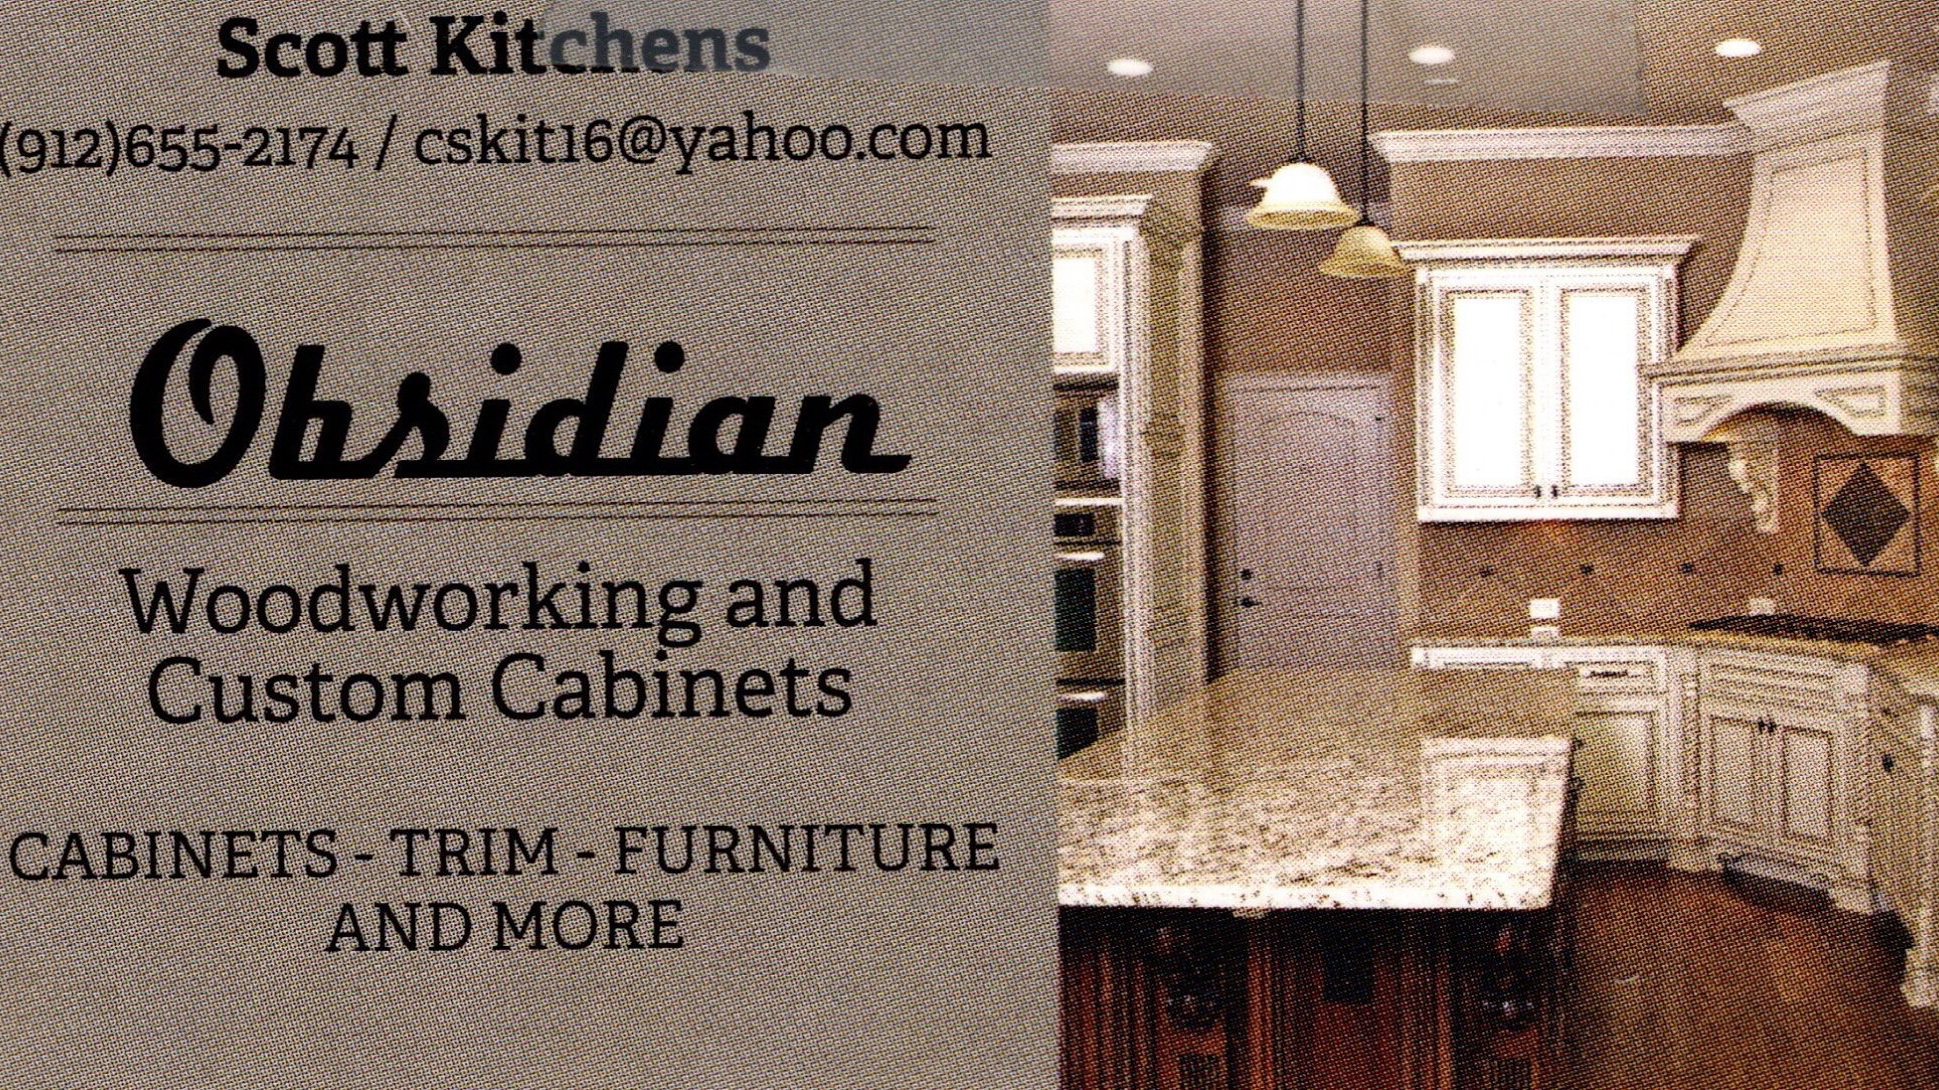 Obsidian Woodworking and Custom Cabinetry